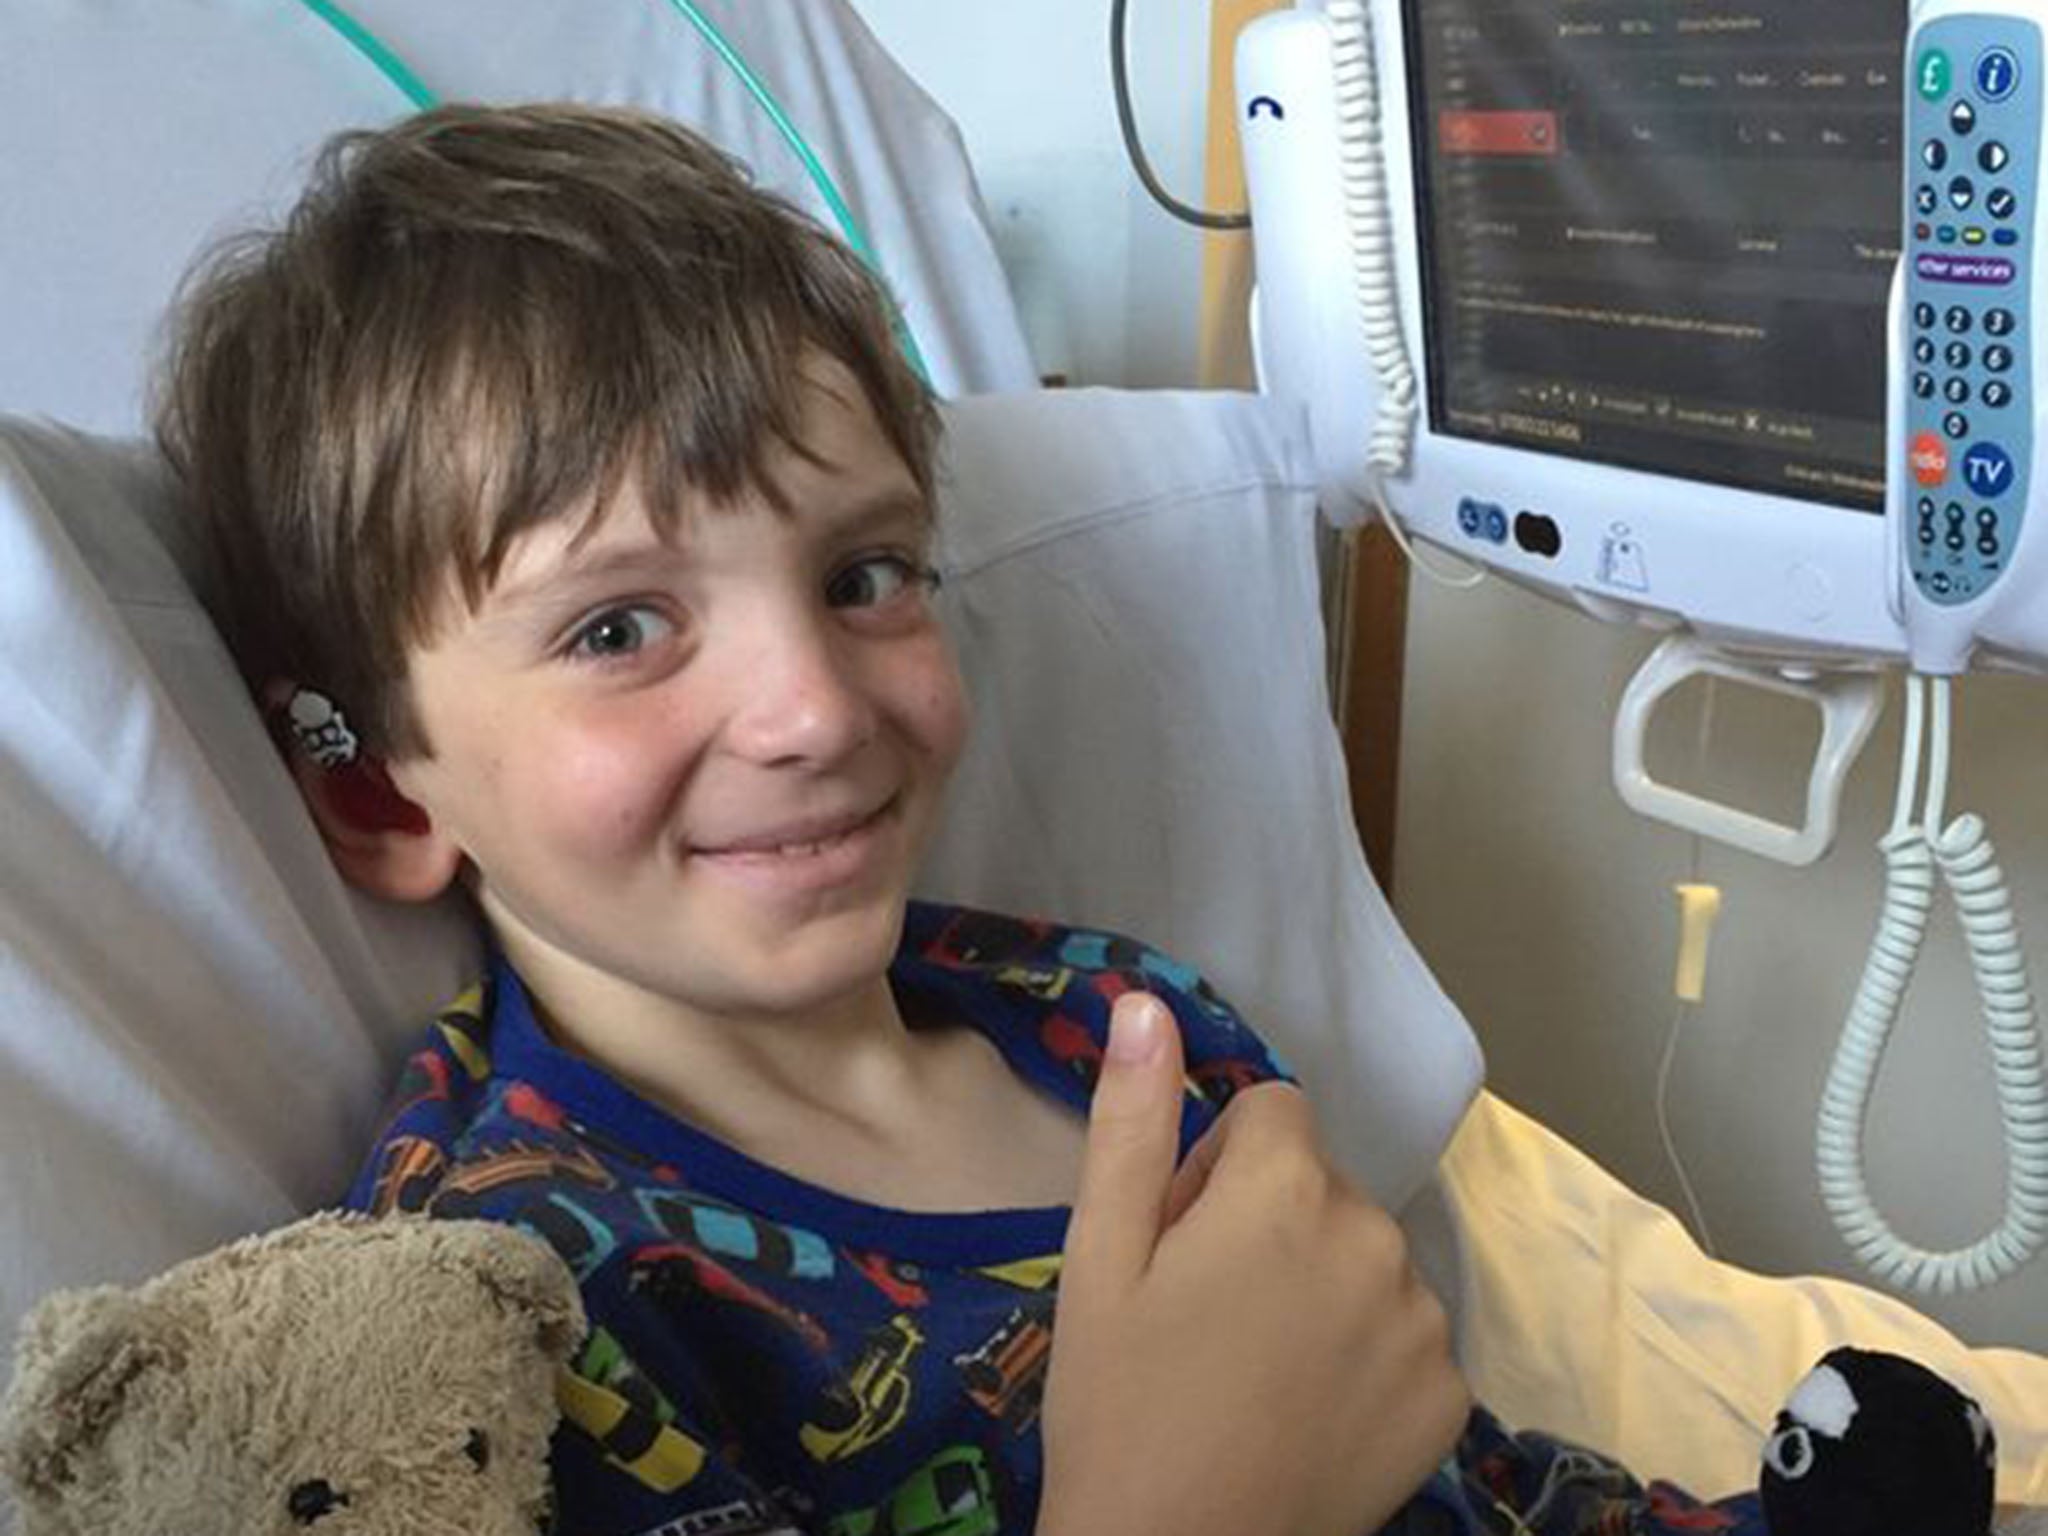 Oliver Brown has been diagnosed with Myelodysplastic Syndrome